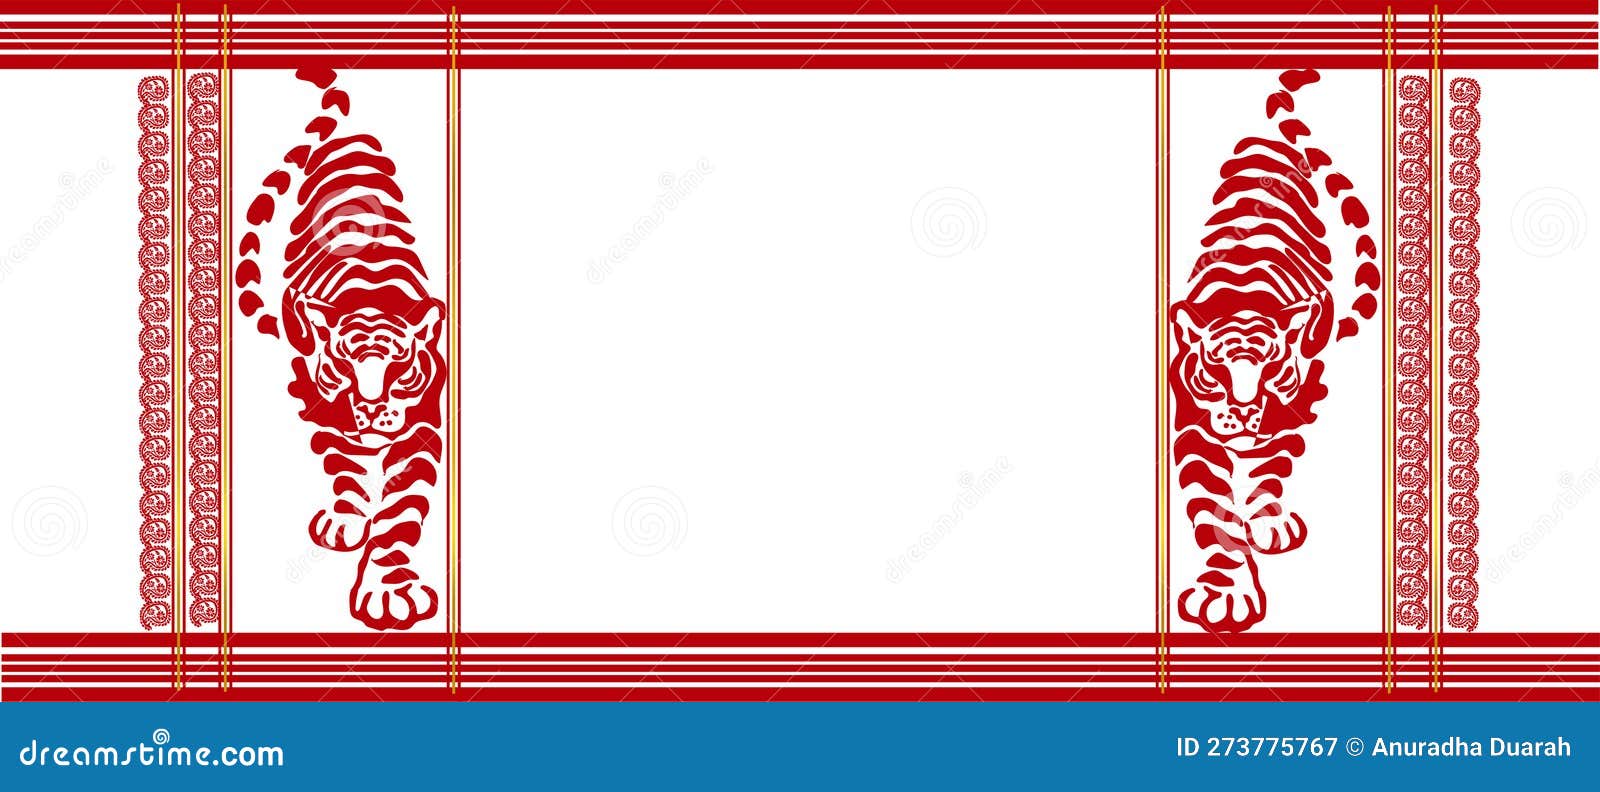 Download this stock image Assamese Gamosa  HGDBBJ from Alamys library of  millions of high resolution stock photos illus  Textile patterns Assam  Stock photos